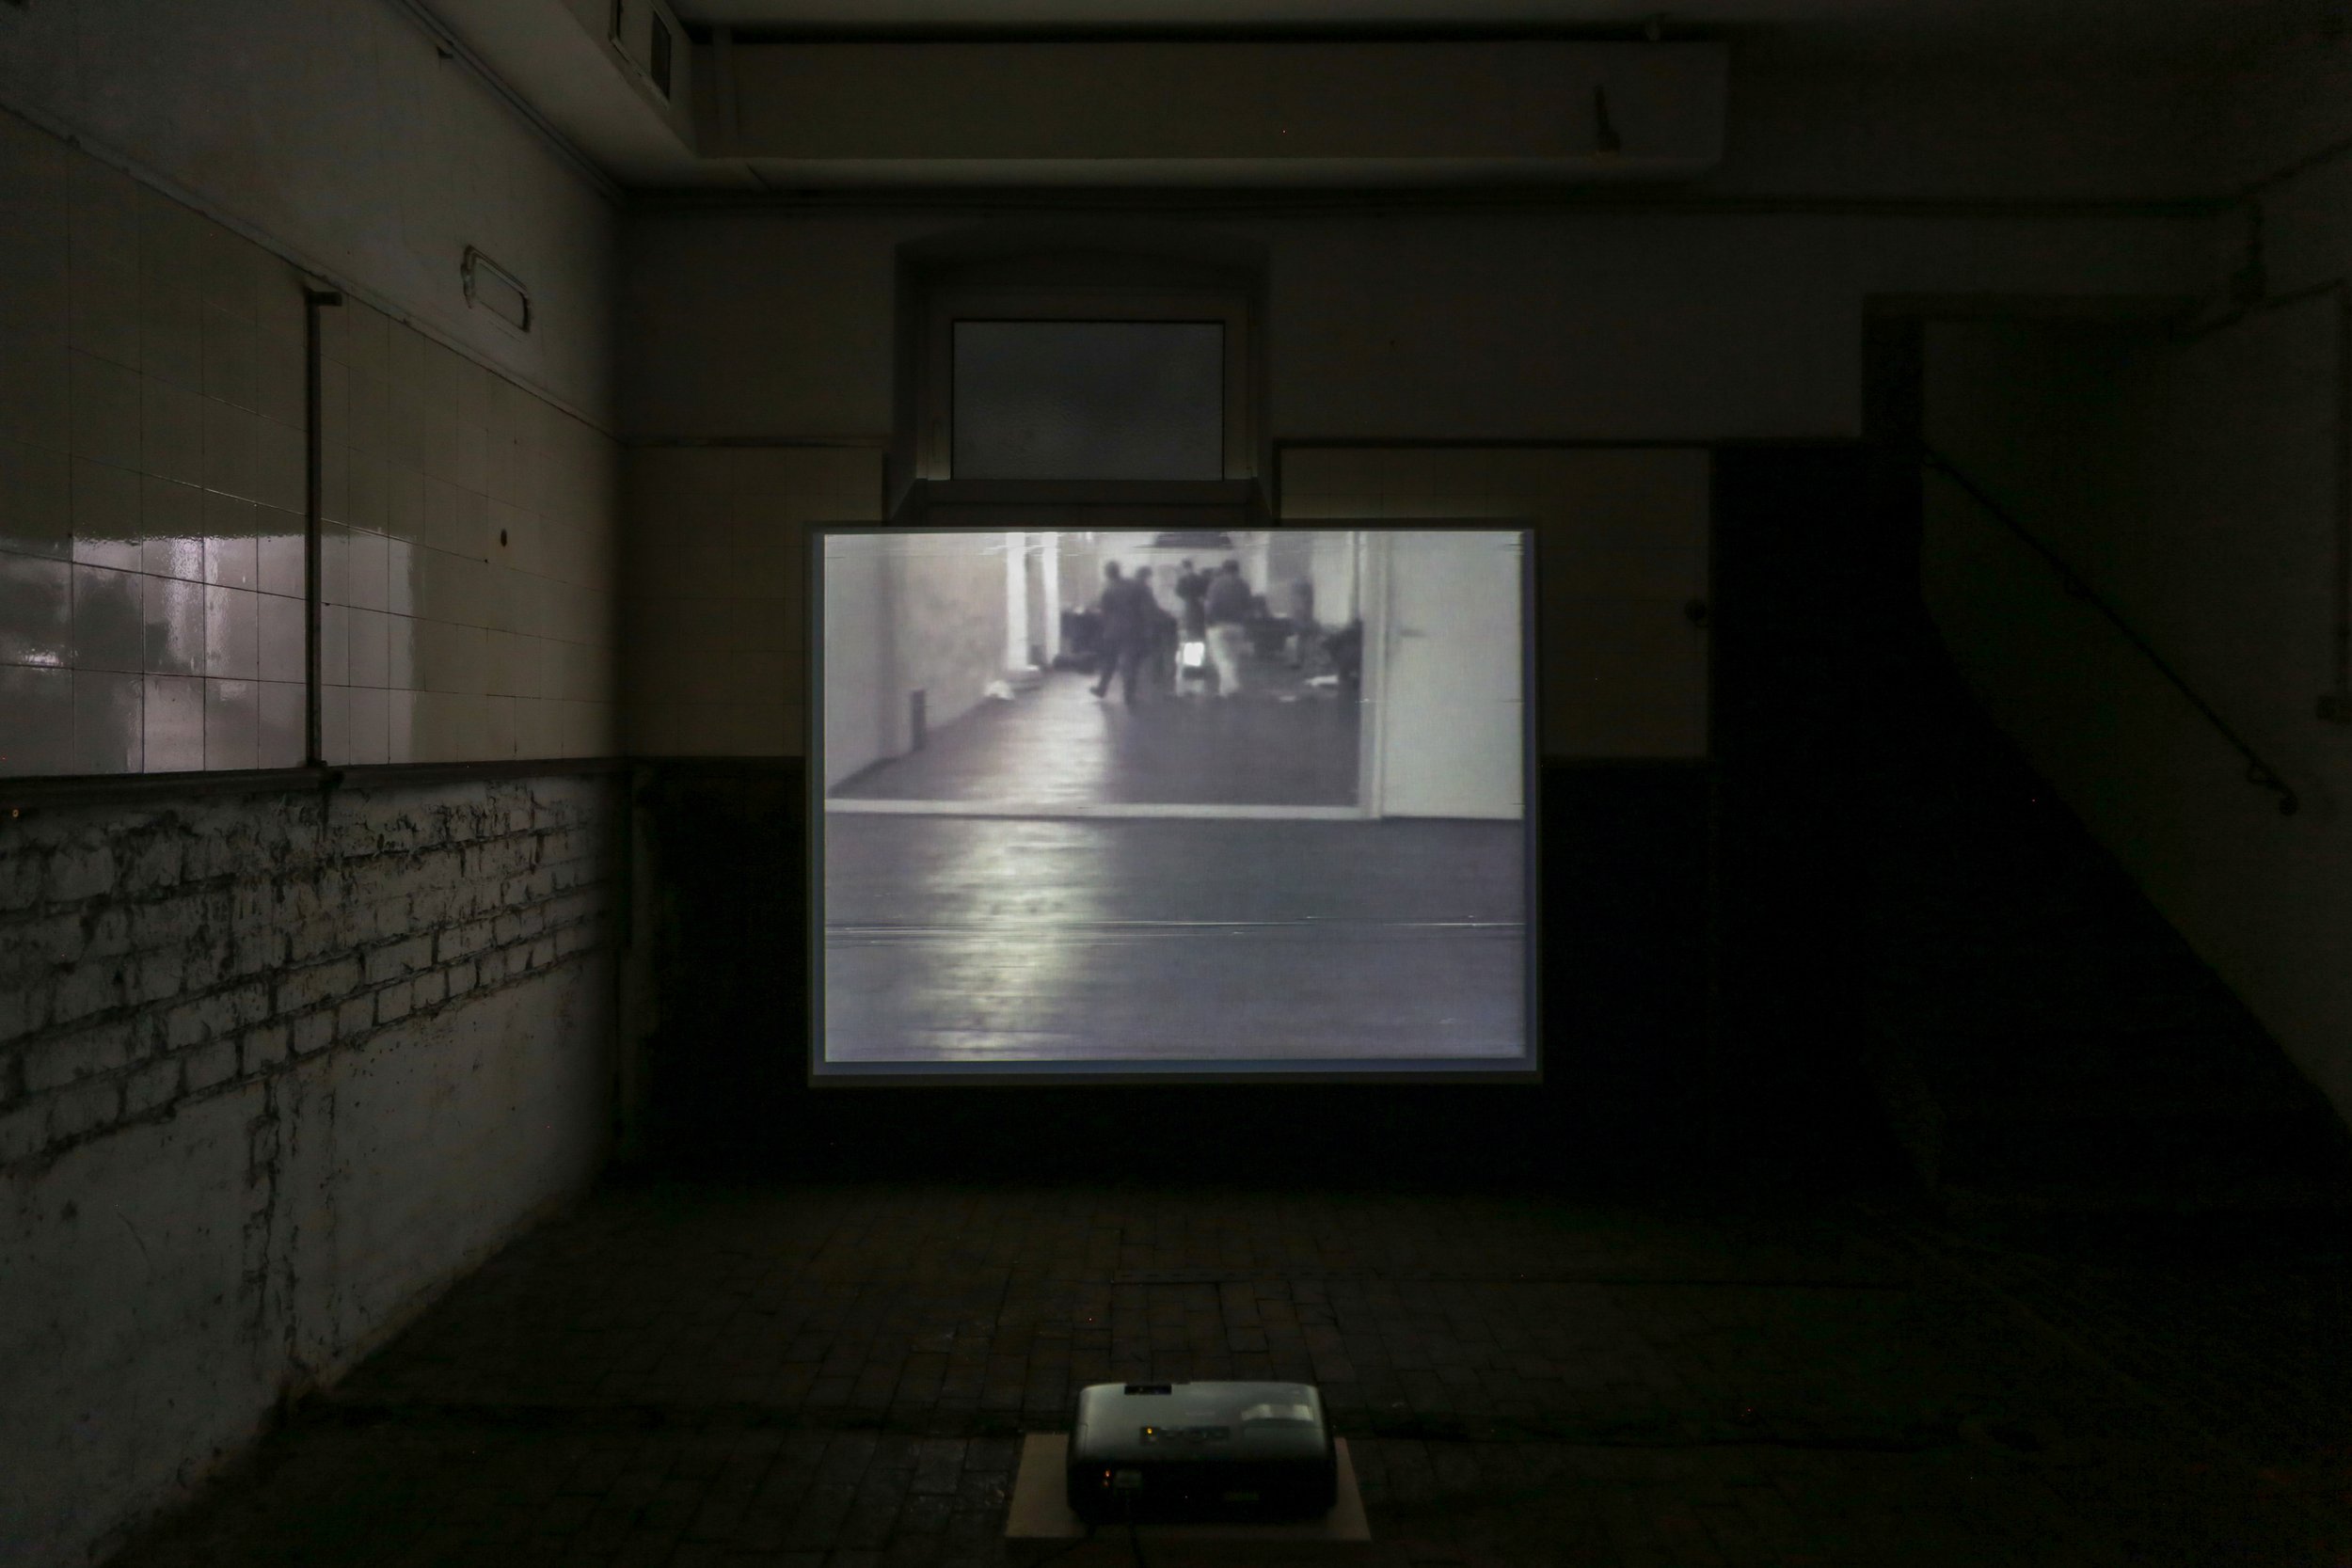   fig24 installation view Joan Jonas, Performance, 1979, 00:11:43., In collections: De Appel, LIMA  